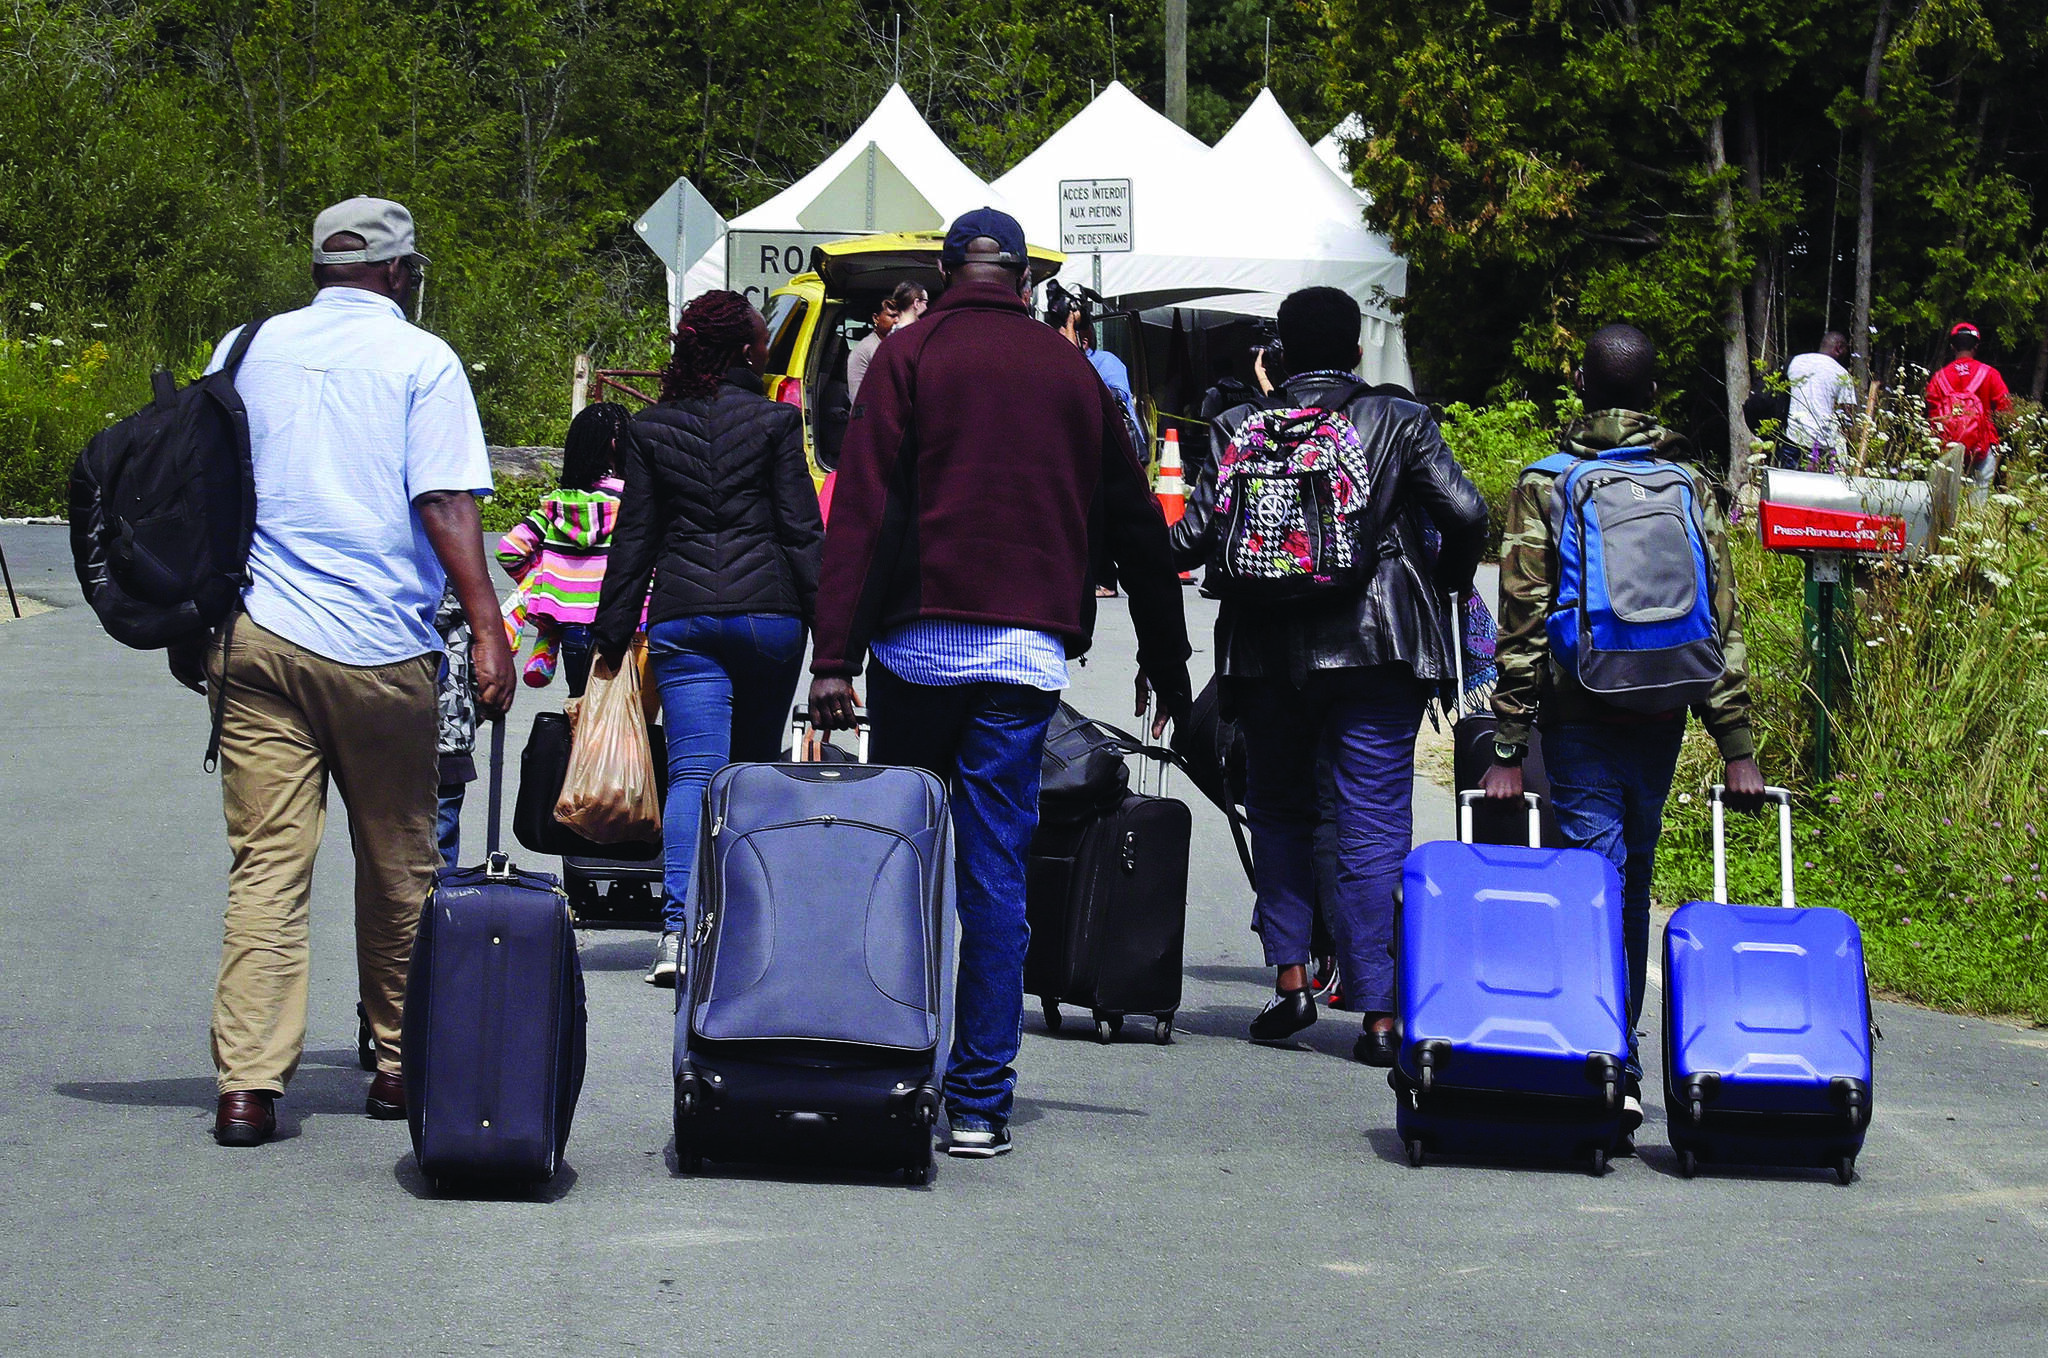 A newly released memo shows federal officials warned last spring that expanding a bilateral refugee pact to the entire Canada-U.S. border would likely fuel smuggling networks and encourage people to seek more dangerous, remote crossing routes. A family from Haiti approach a tent in Saint-Bernard-de-Lacolle, Quebec, stationed by Royal Canadian Mounted Police, as they haul their luggage down Roxham Road in Champlain, N.Y., on August 7, 2017. THE CANADIAN PRESS/AP, Charles Krupa